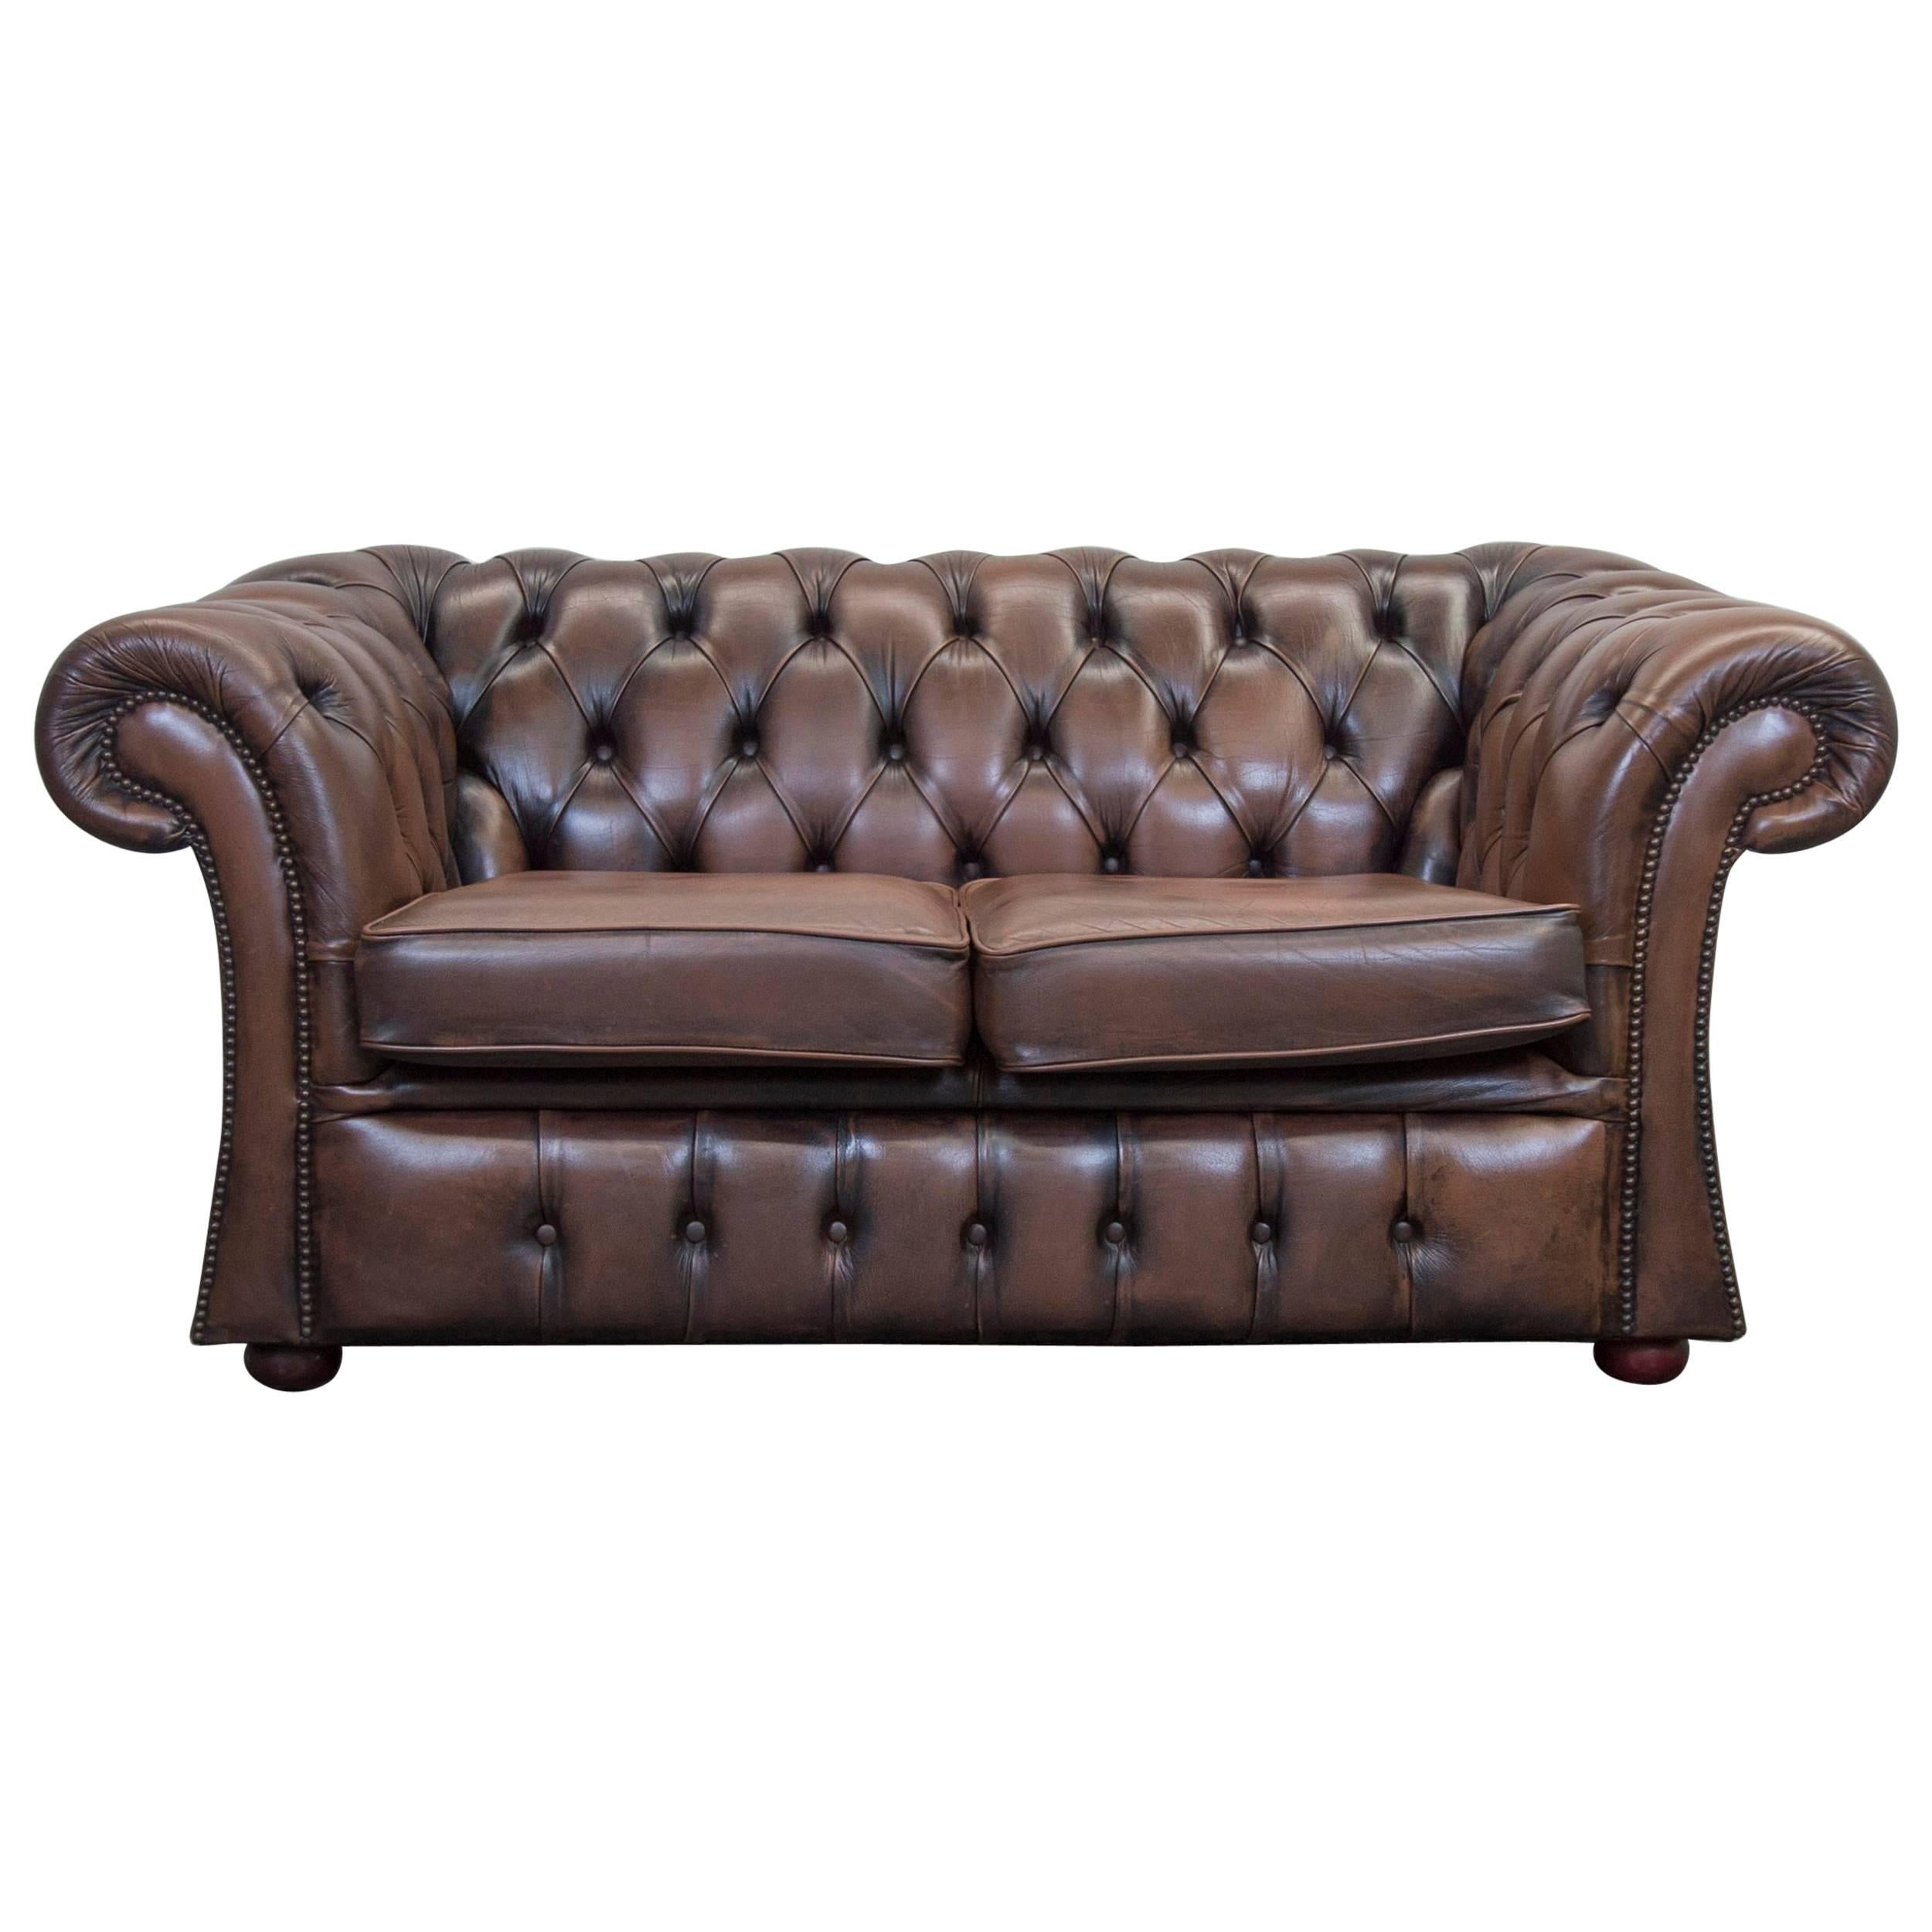 Chesterfield Leather Sofa Brown Two-Seat Couch Retro Vintage